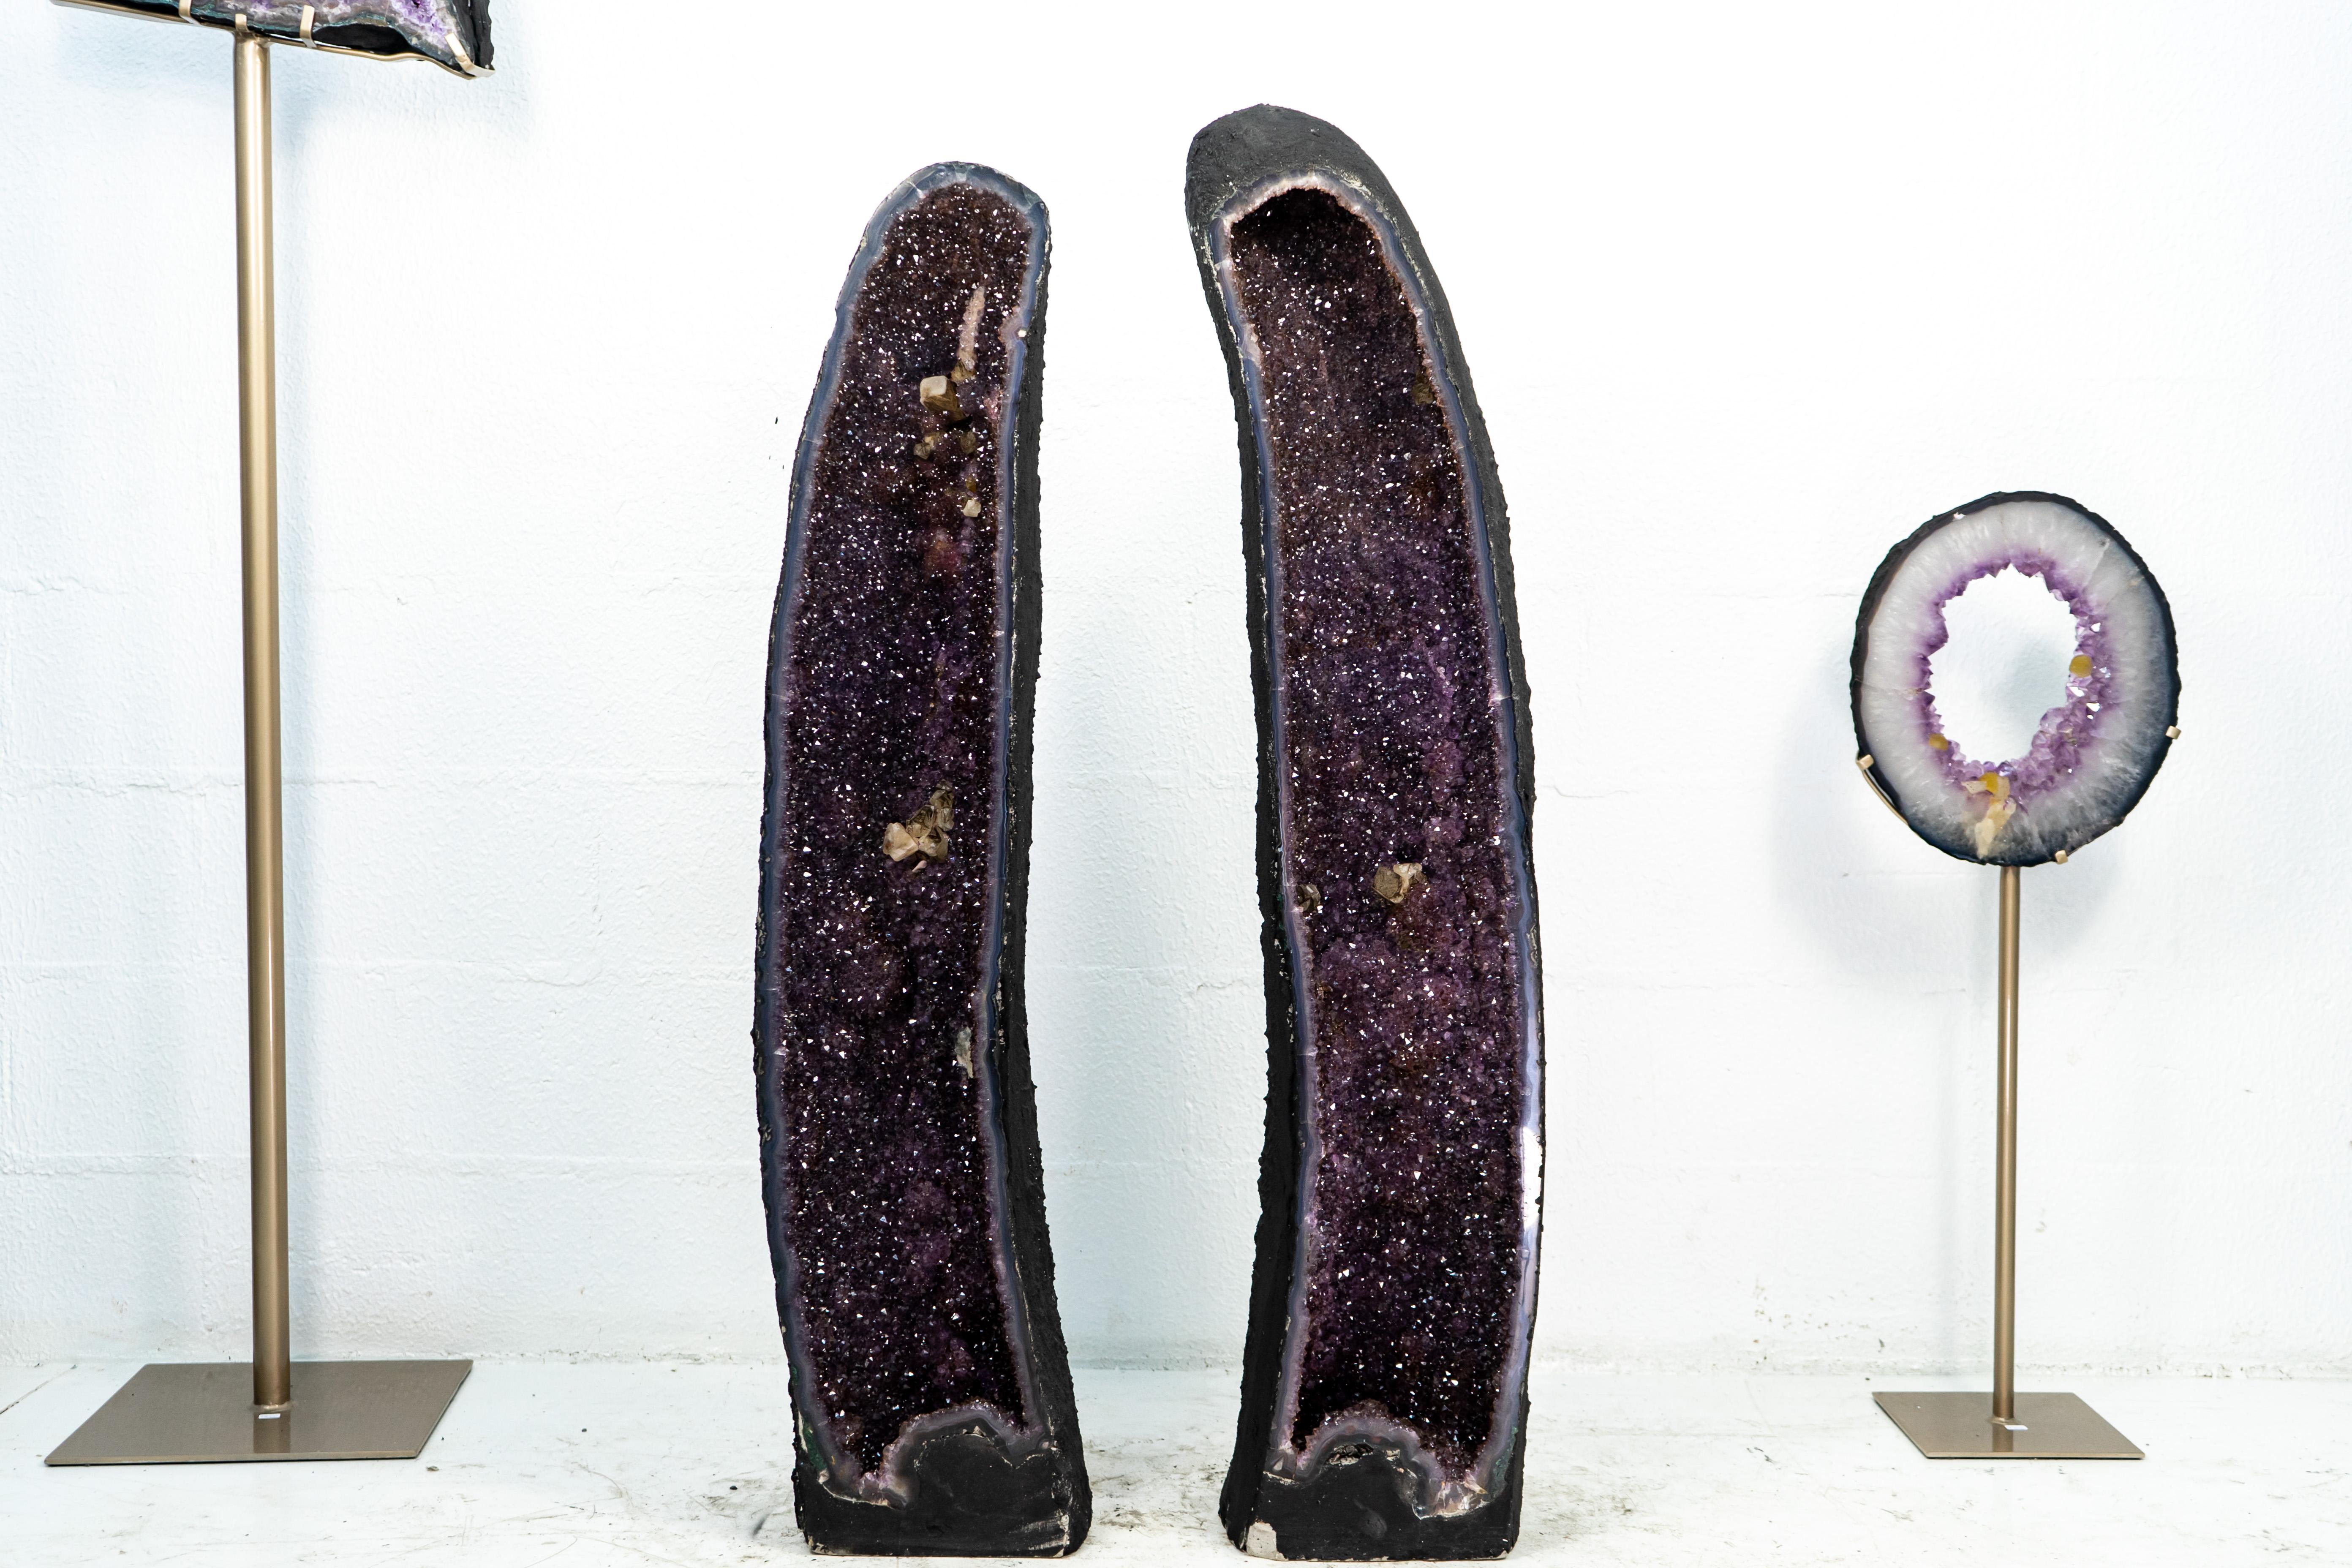 Book-matching and with rare qualities, these geodes are ready to become the conversation starter for your décor, be it your house, office, or crystal collection.

A one-of-a-kind masterpiece we bring to you, this pair of Amethyst Cathedral Geodes